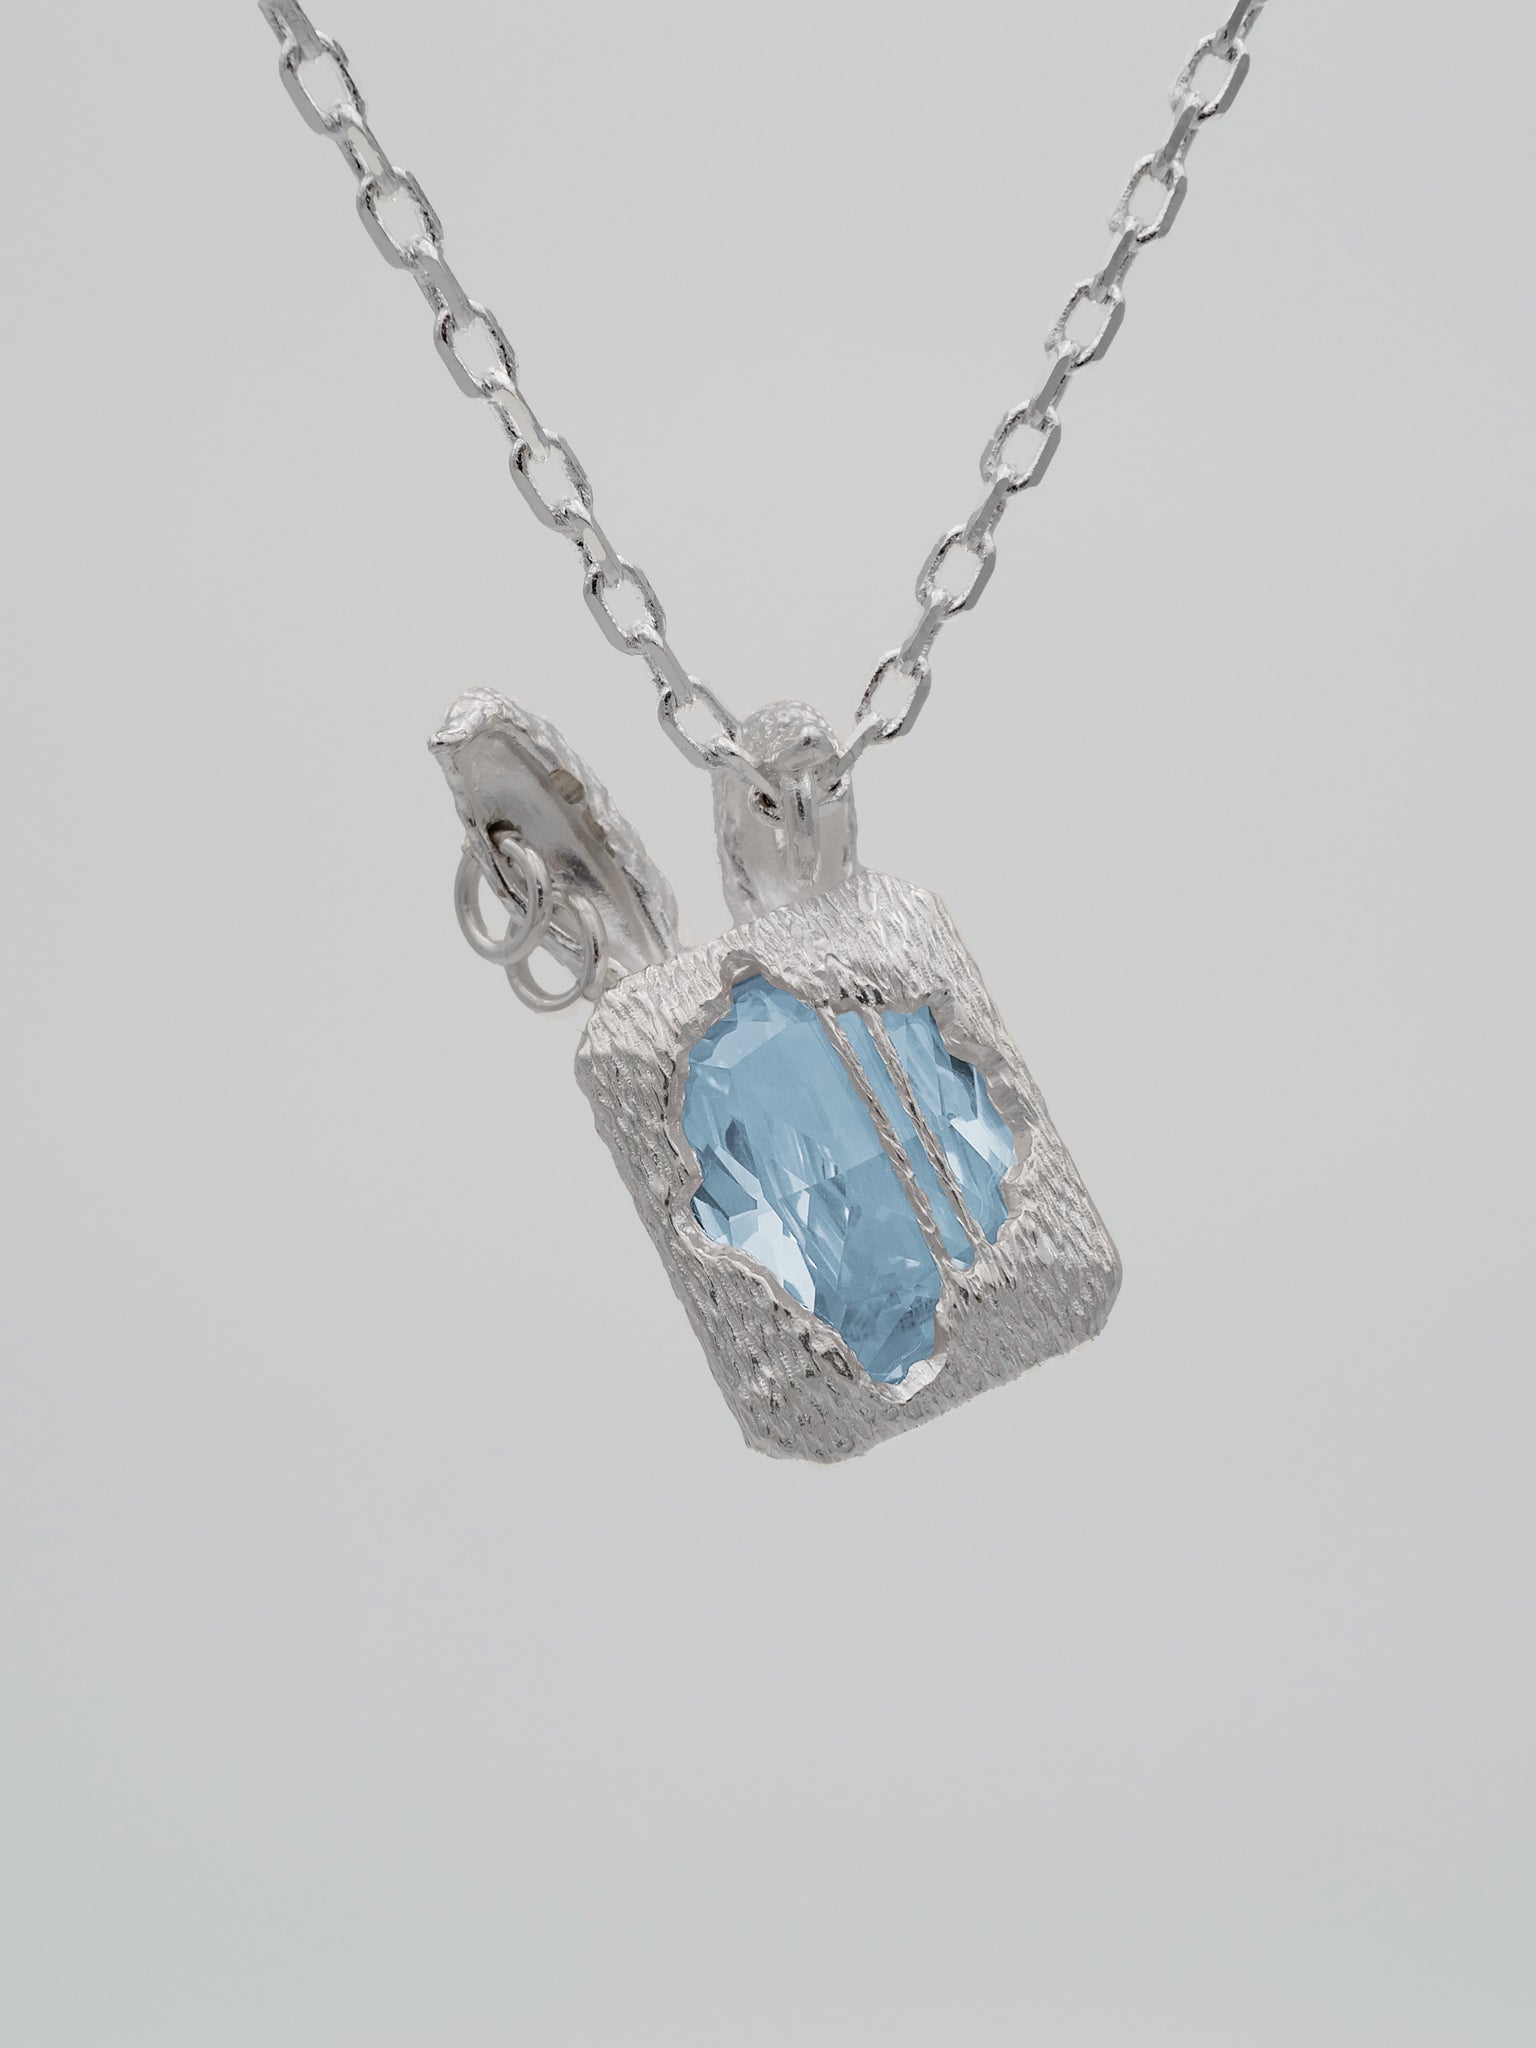 SILVER METAL ZONG NECKLACE - WILD HARE EDITION (BLUE STONE)